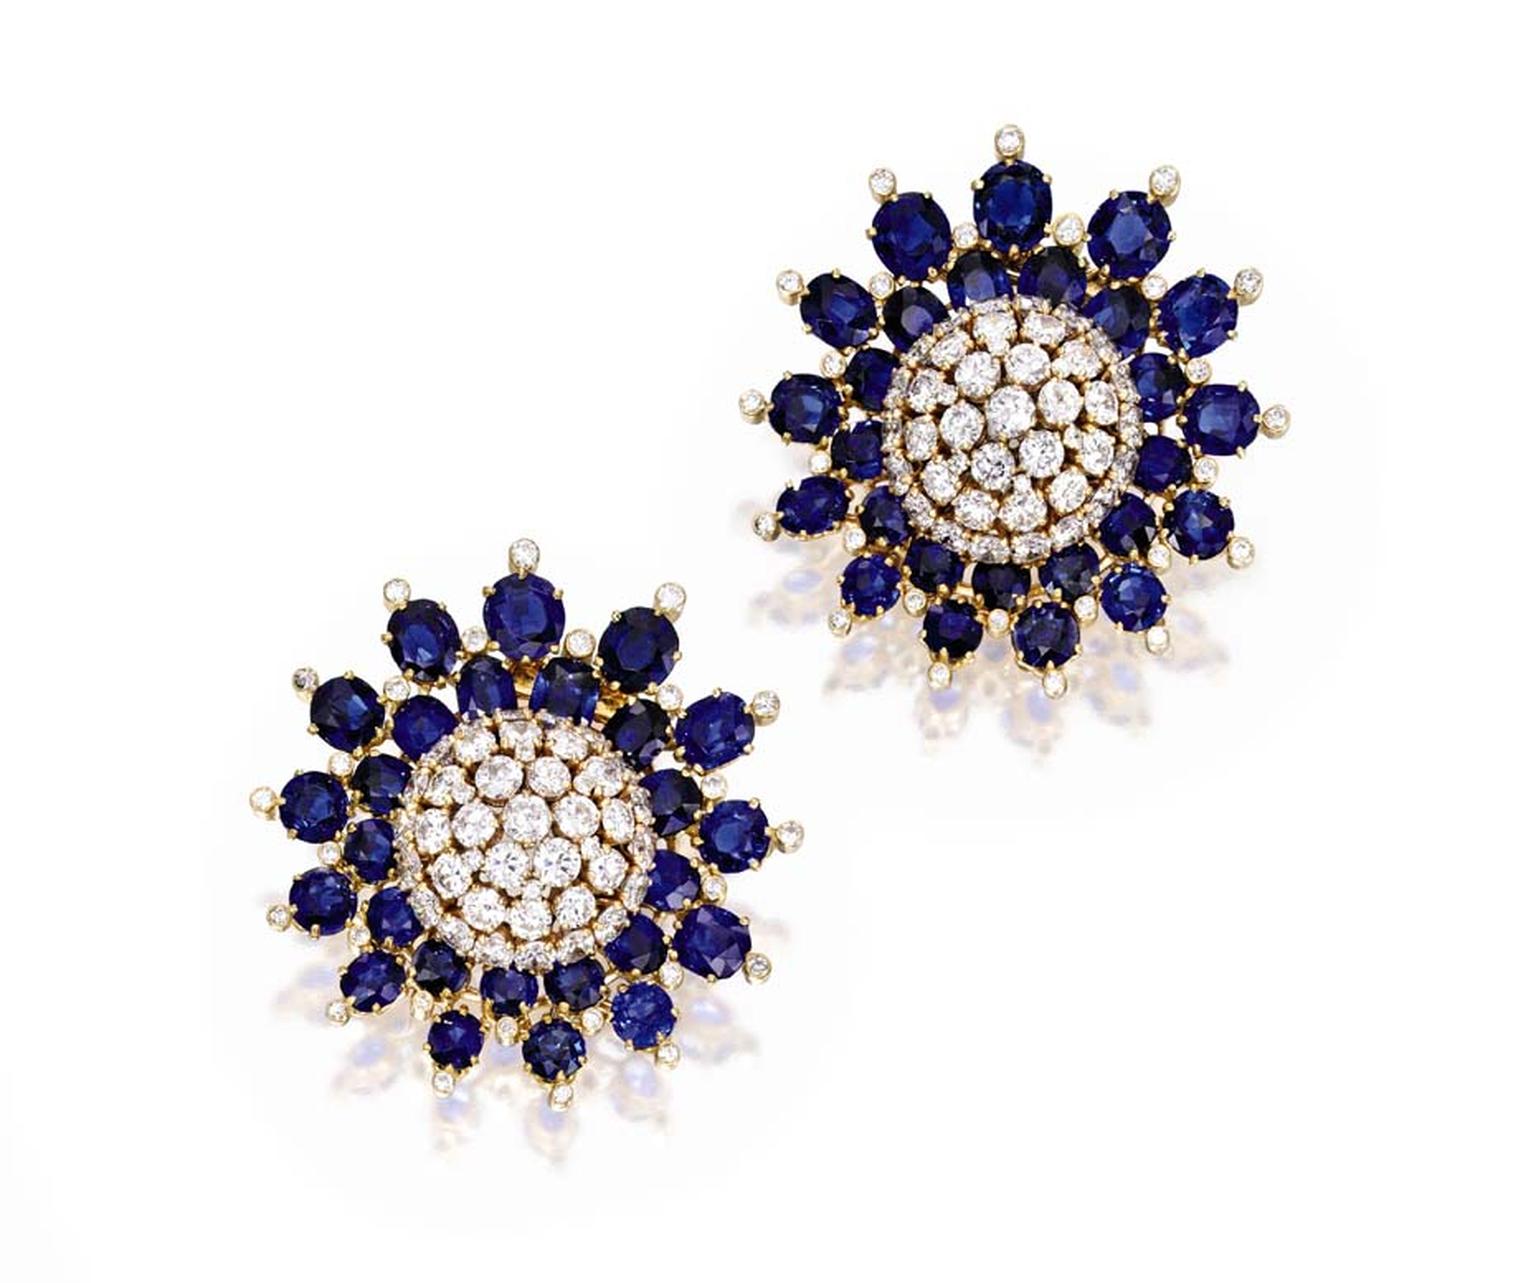 A pair of Van Cleef & Arpels brooches will also go under the hammer at the Bunny Mellon jewelry sale this November at Sotheby's New York. Shaped like two flower heads, the brooches are each set with 20ct of sapphires encircling a sparkling diamond corolla